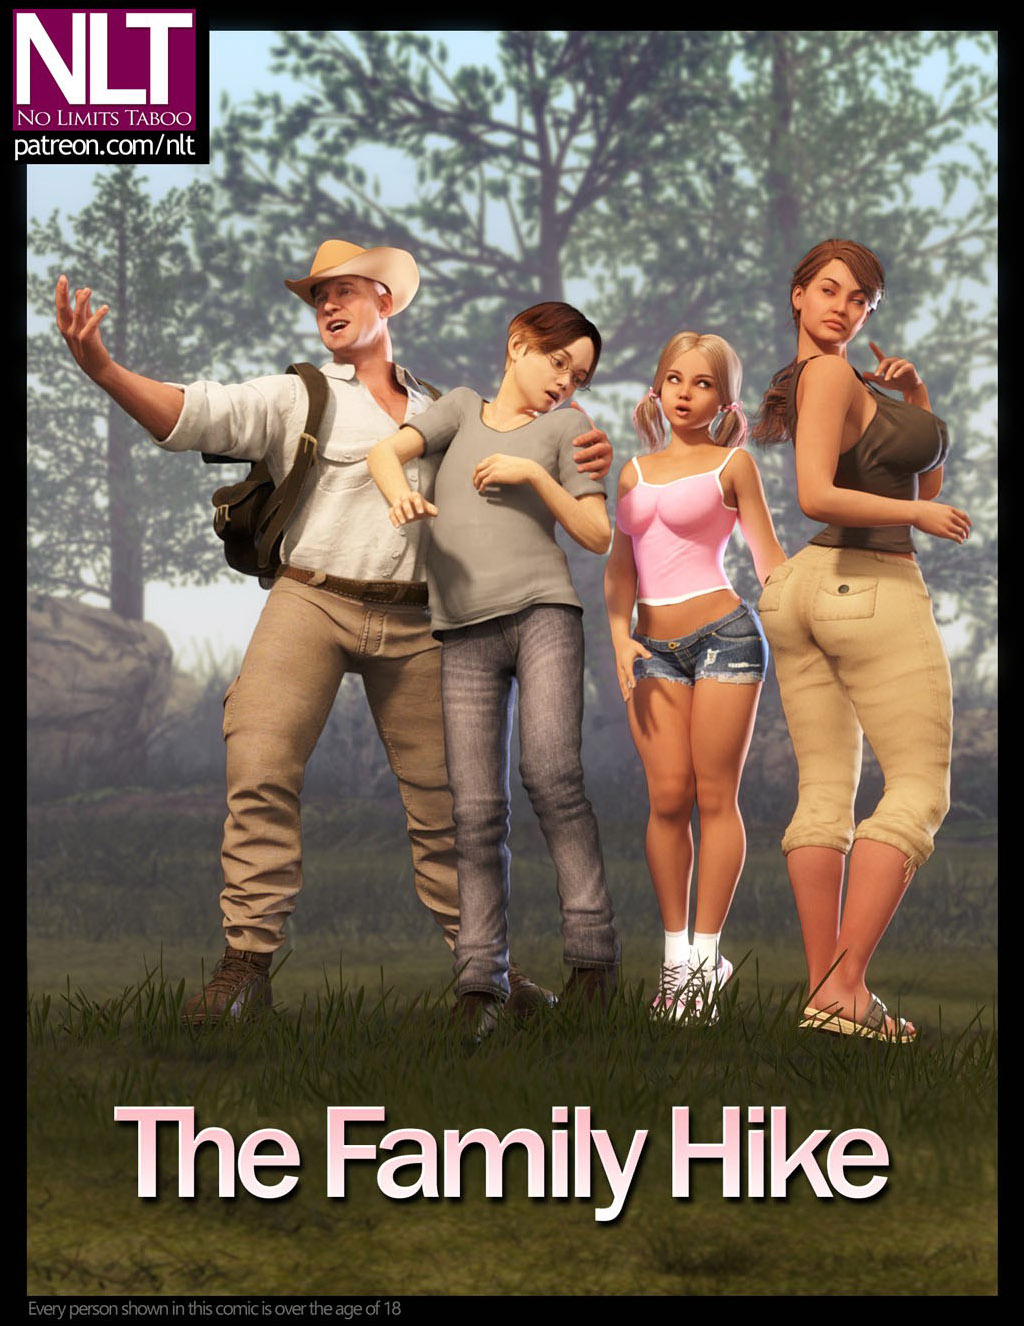 THE FAMILY HIKE